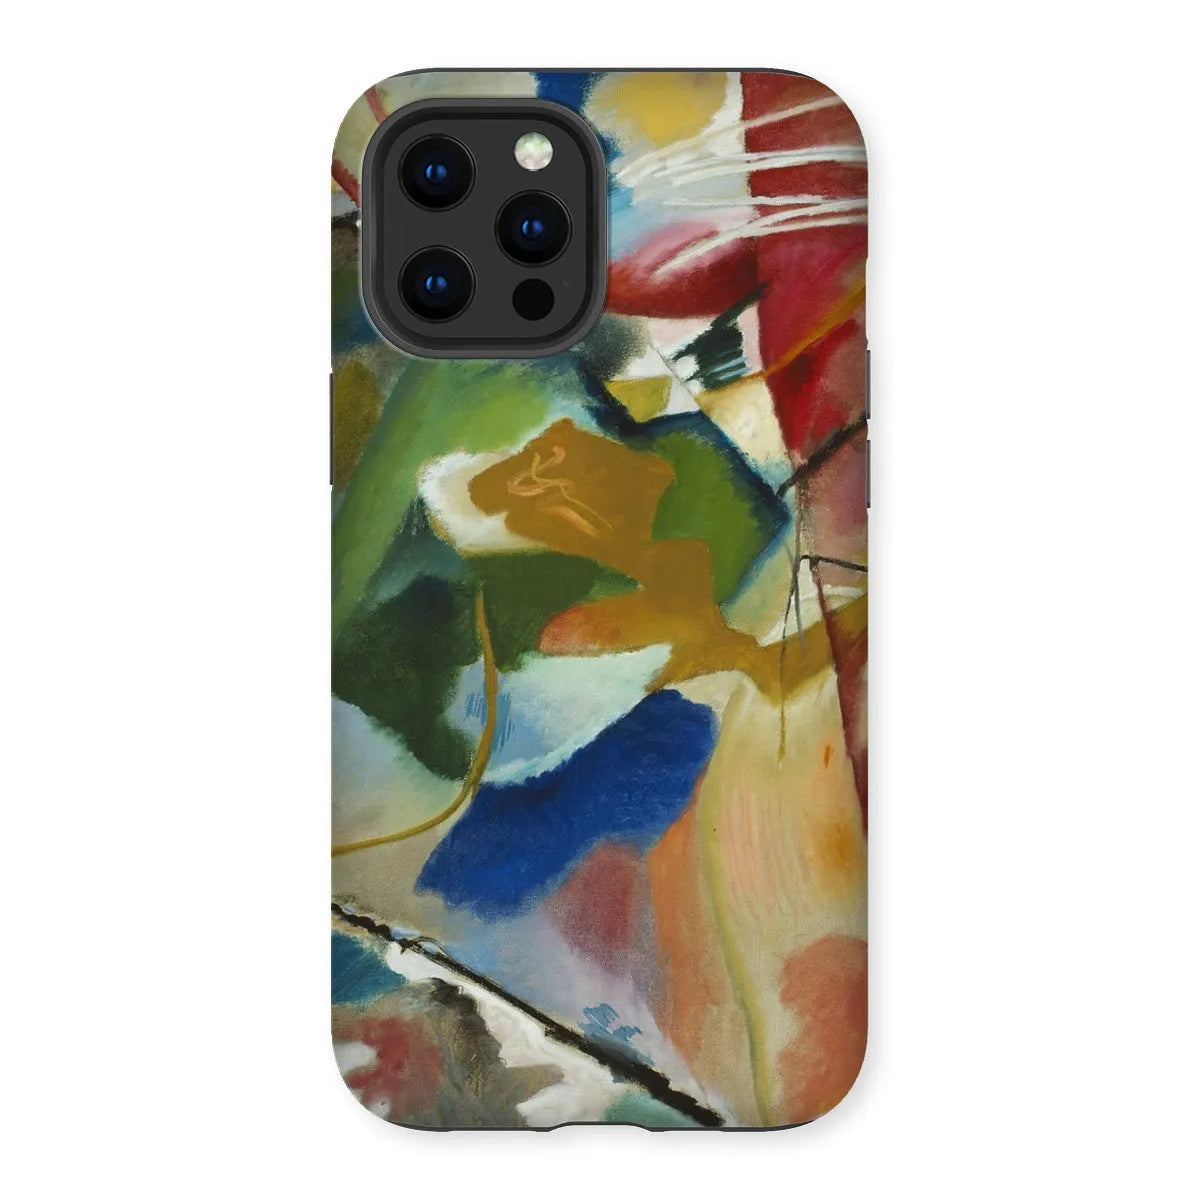 Painting With Green Center Art Phone Case - Wassily Kandinsky - Iphone 12 Pro Max / Matte - Mobile Phone Cases